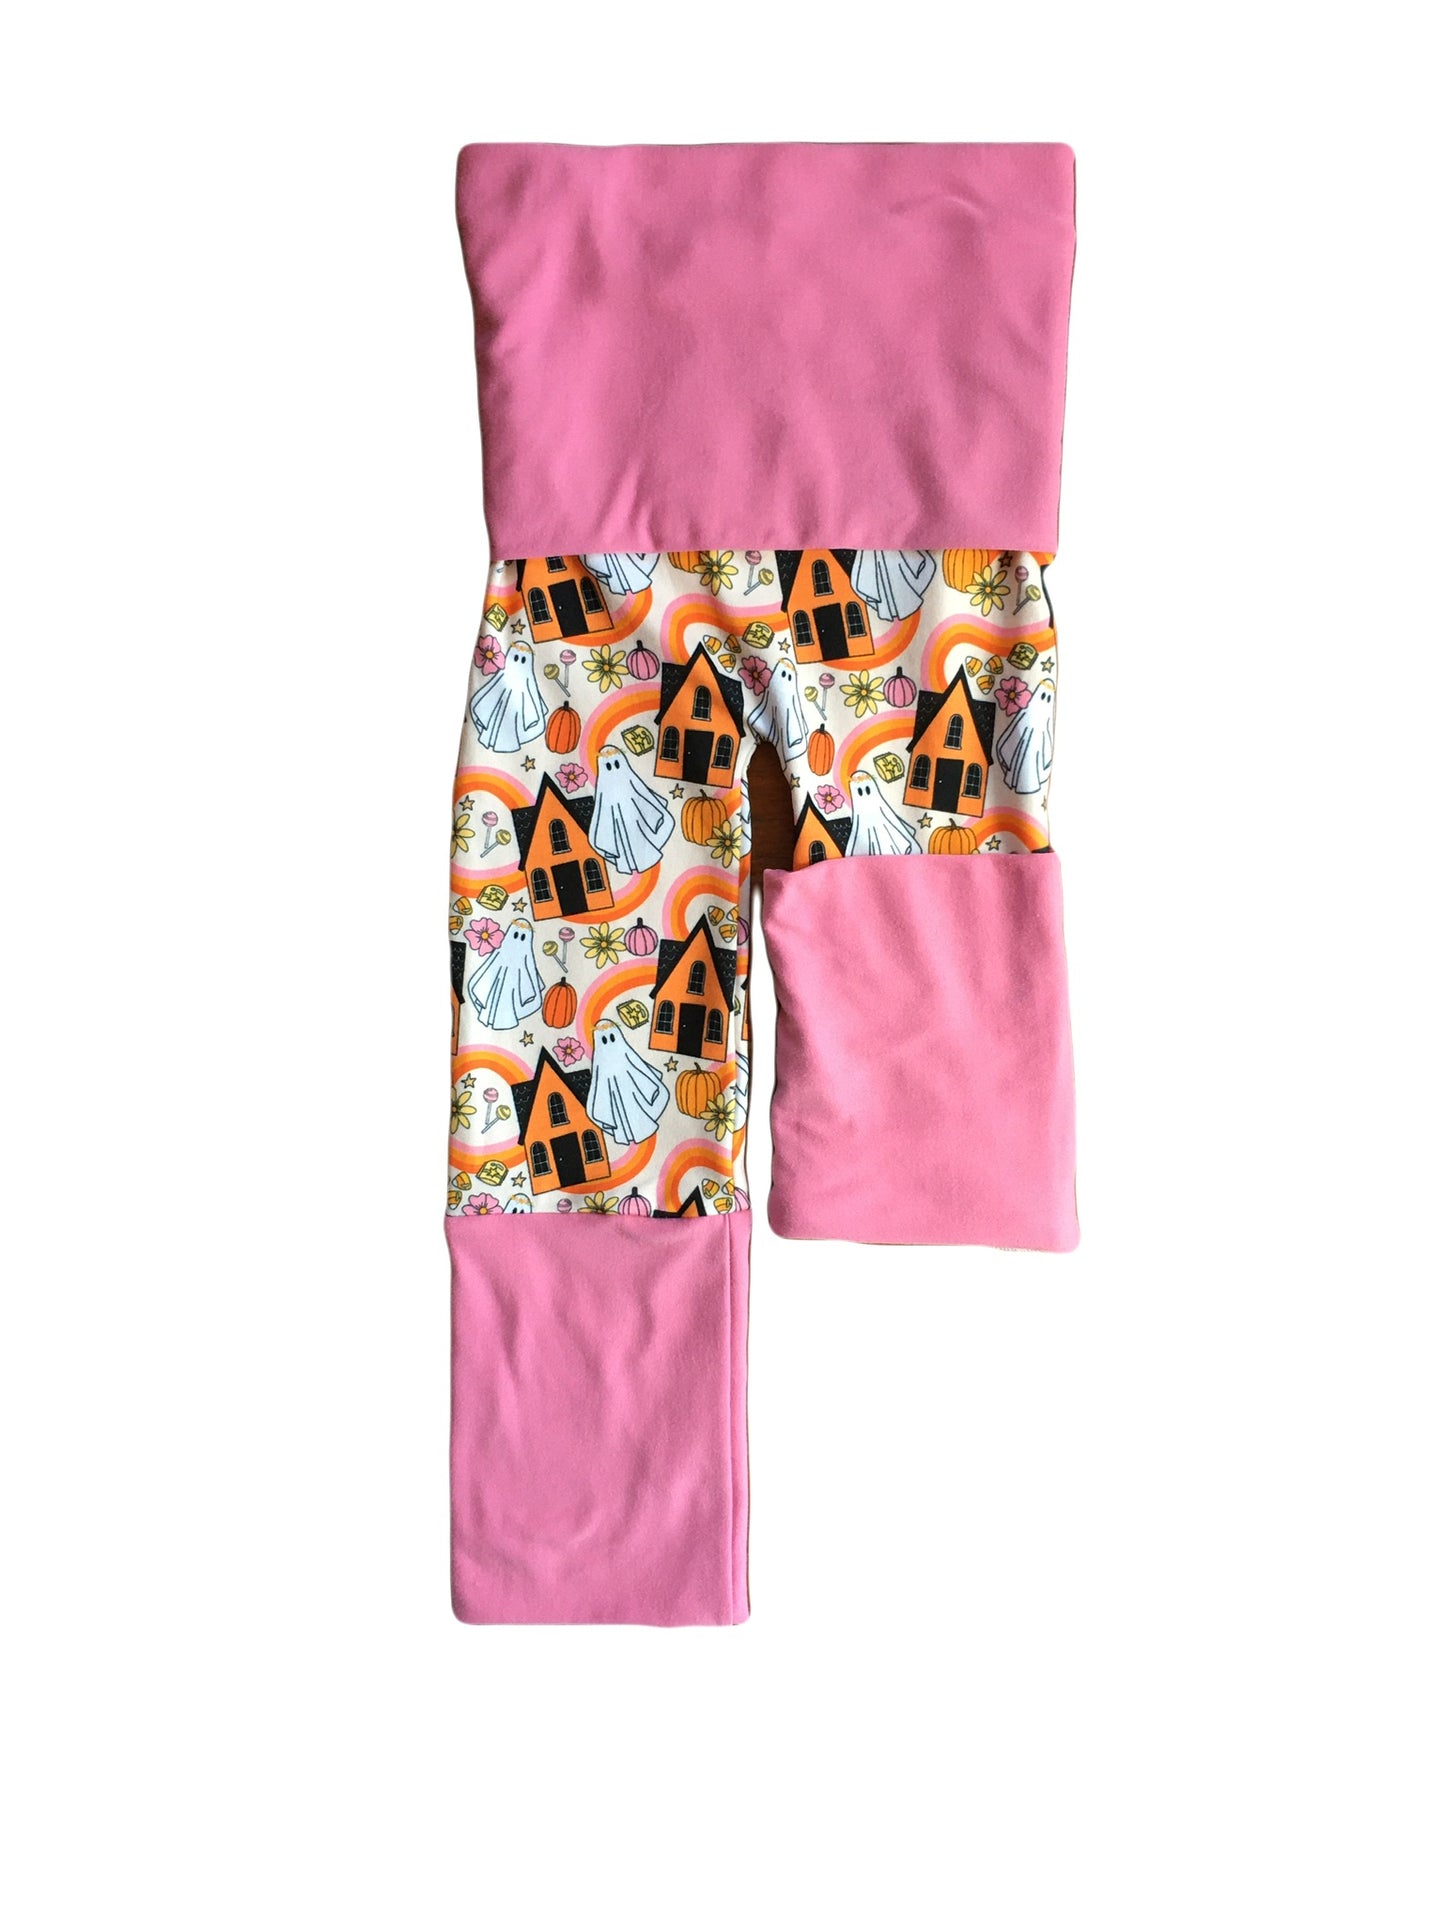 Adjustable Pants - Haunted House with Pink